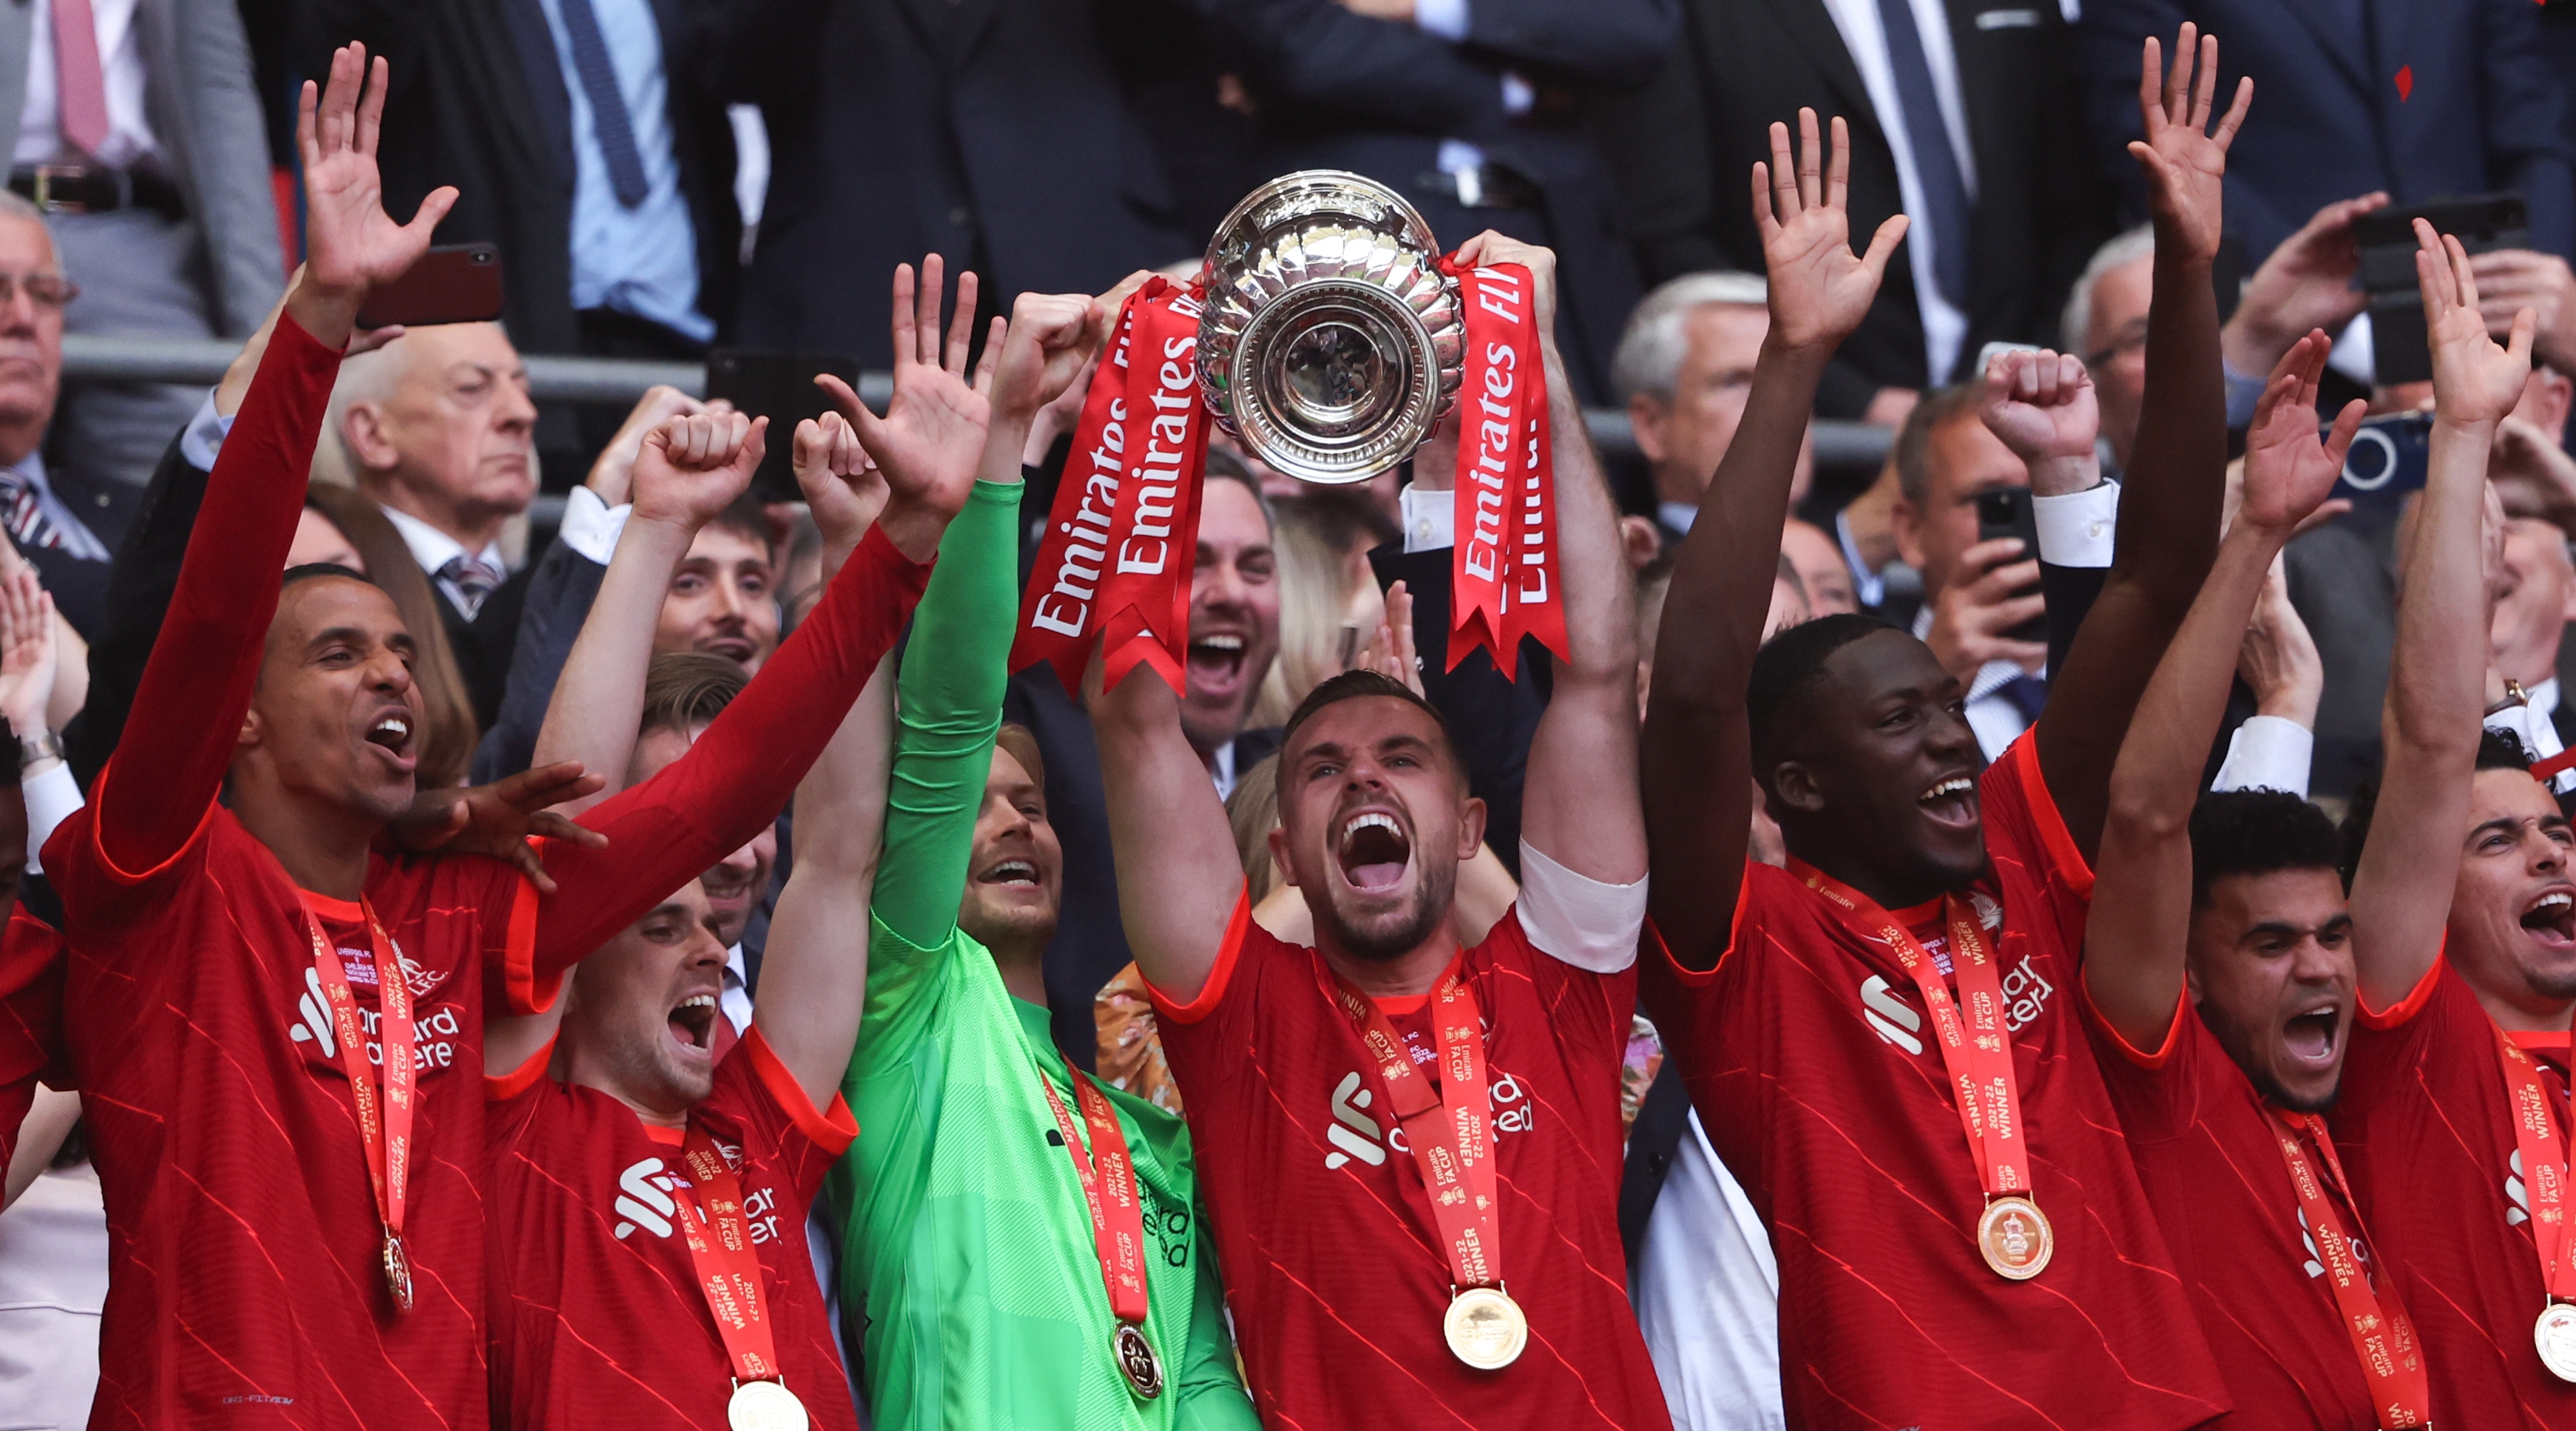 Liverpool captain Jordan Henderson lifts the FA Cup trophy after Liverpool beat Chelsea in the 2022 FA Cup final on 14 May, 2022 at Wembley Stadium in London, United Kingdom.